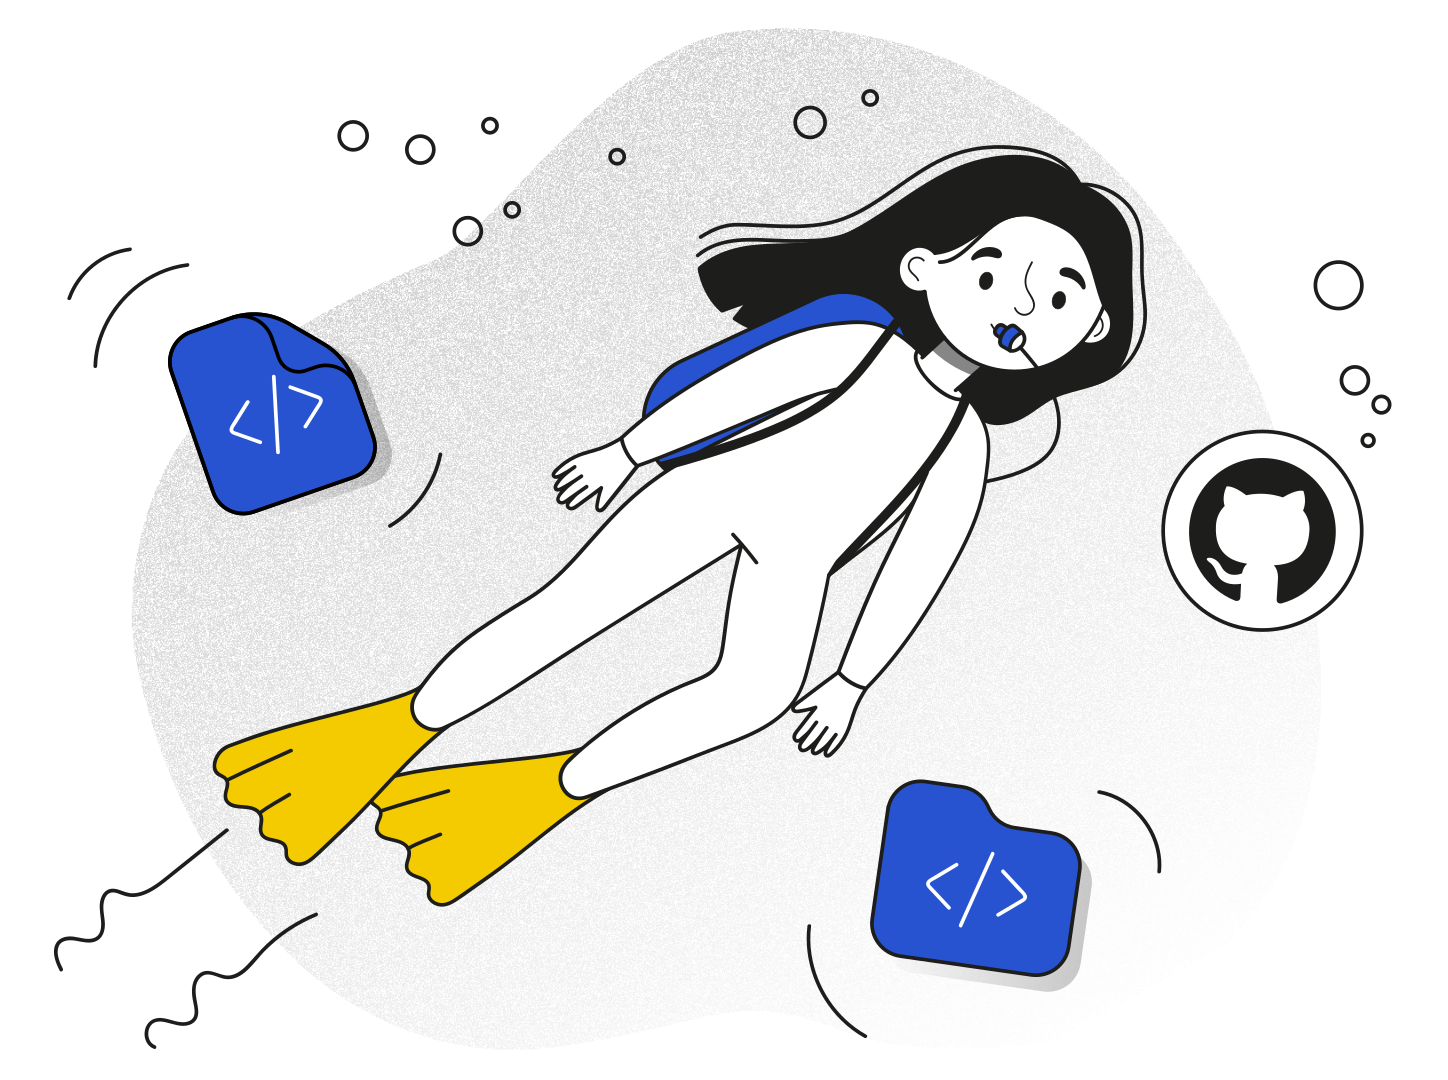 A diver surrounded by Github logo and documentation references